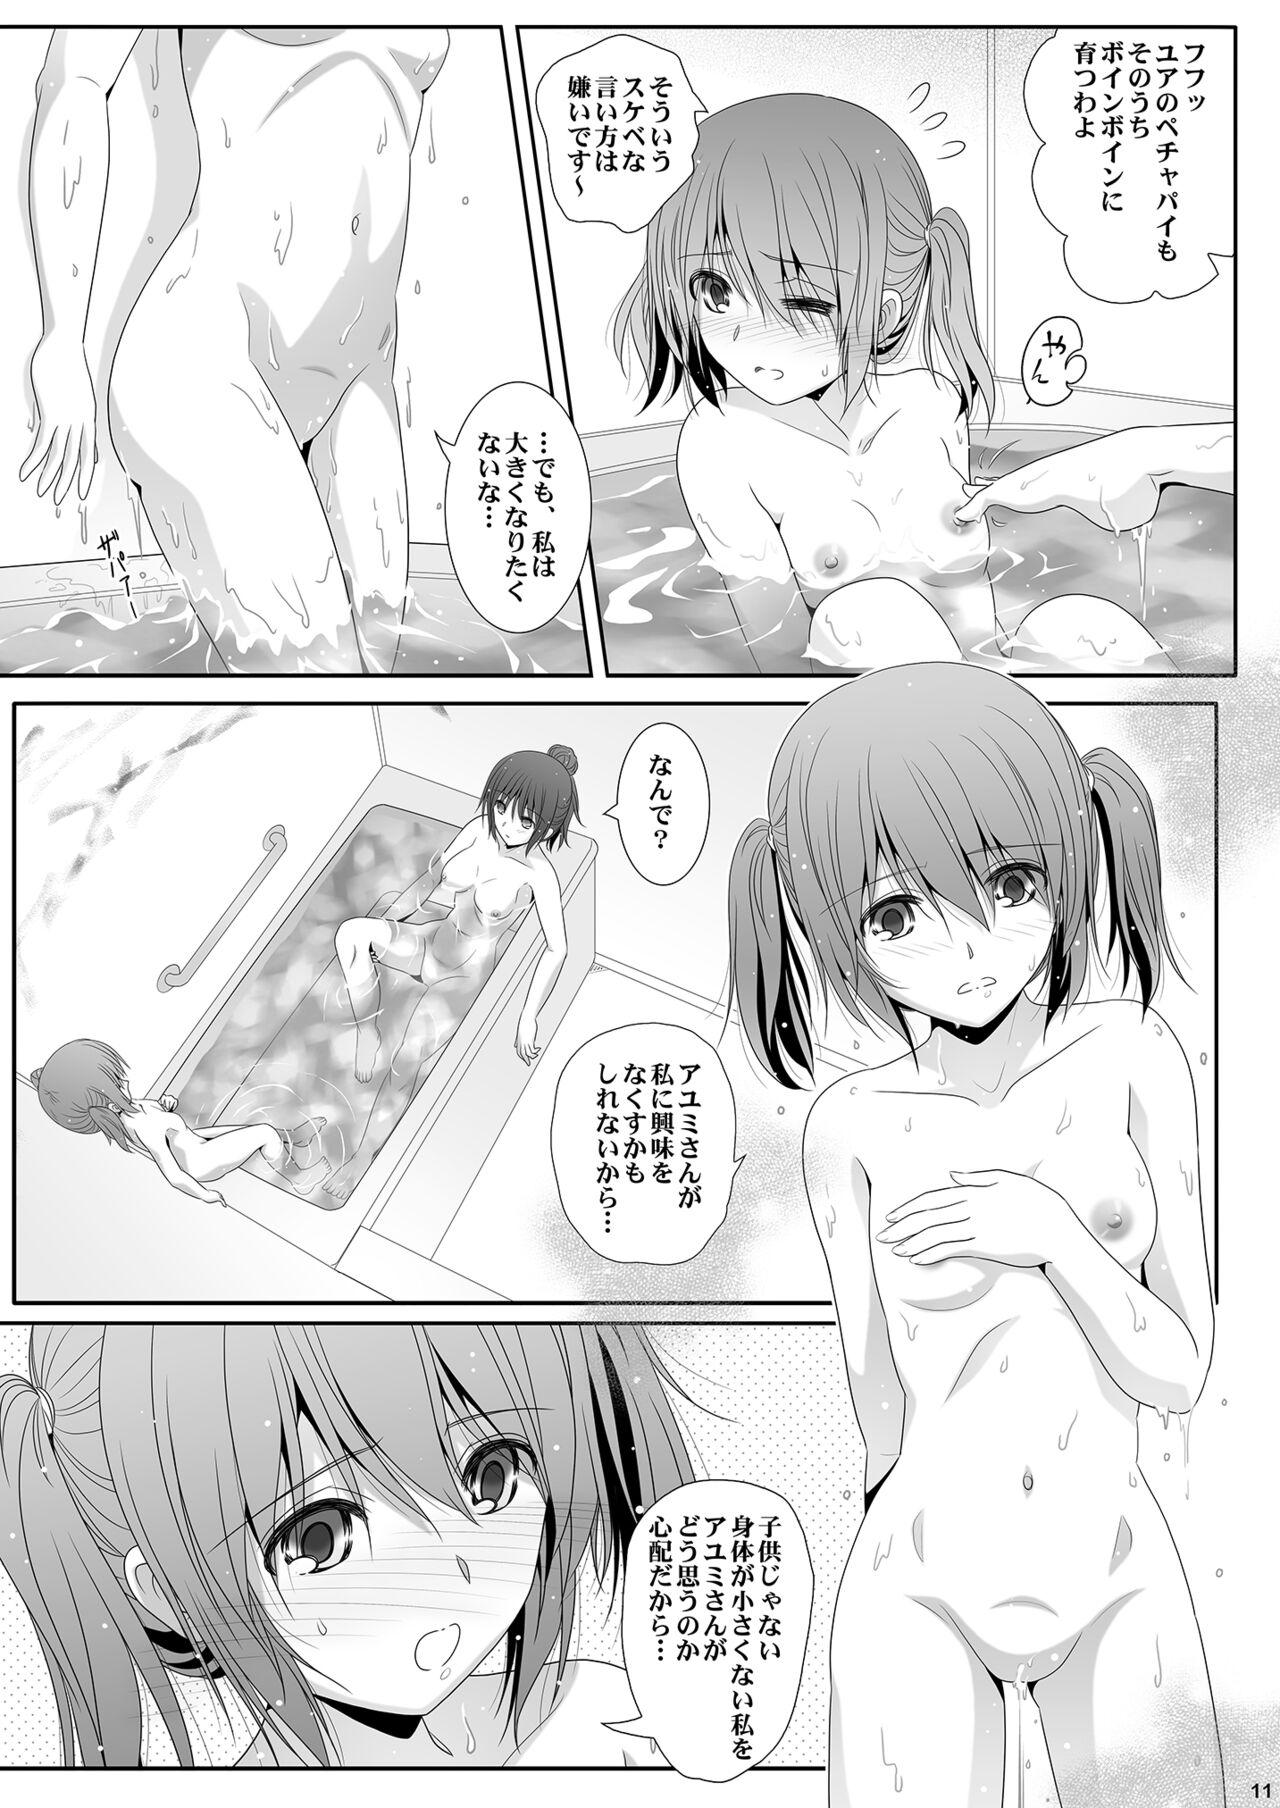 Mask Toshi no Thirteen - Age Difference is 13 Years - Original Real Amateurs - Page 11